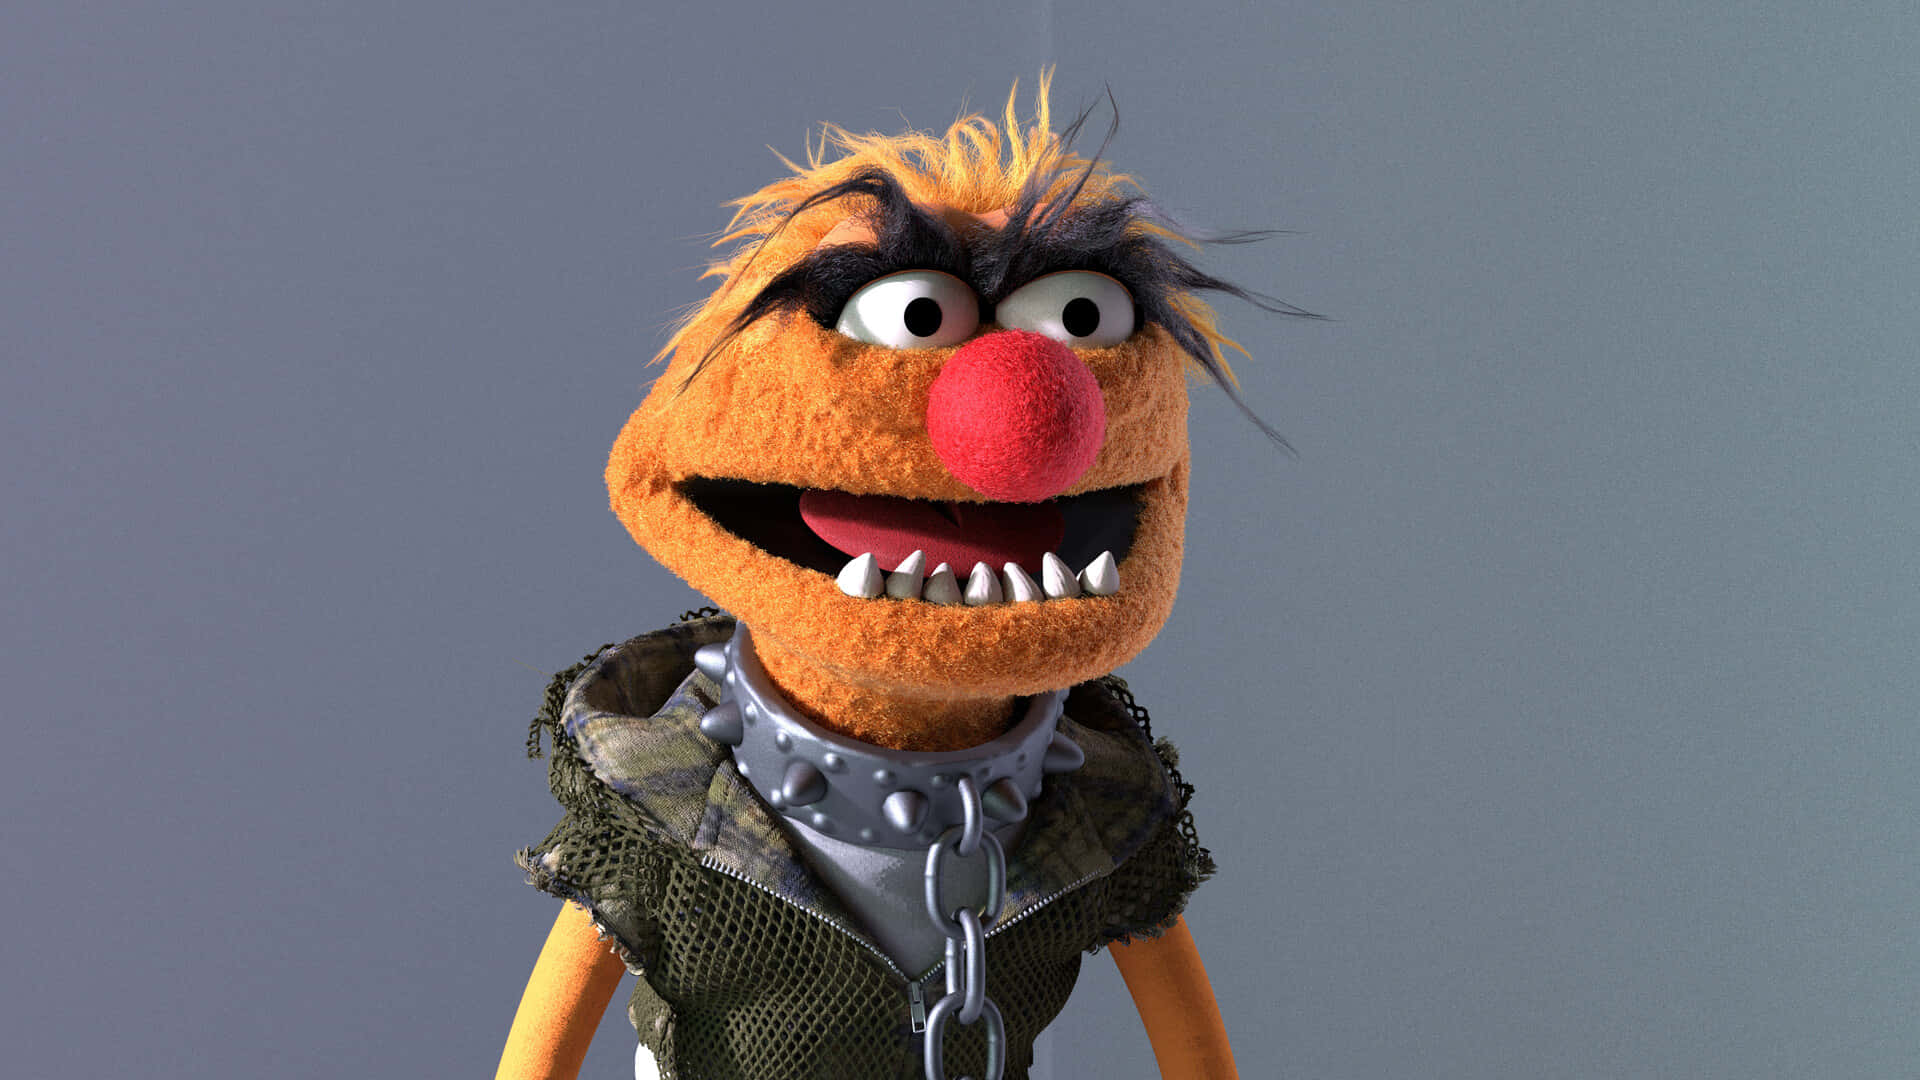 One of the Most Lovable Muppets - Animal! Wallpaper